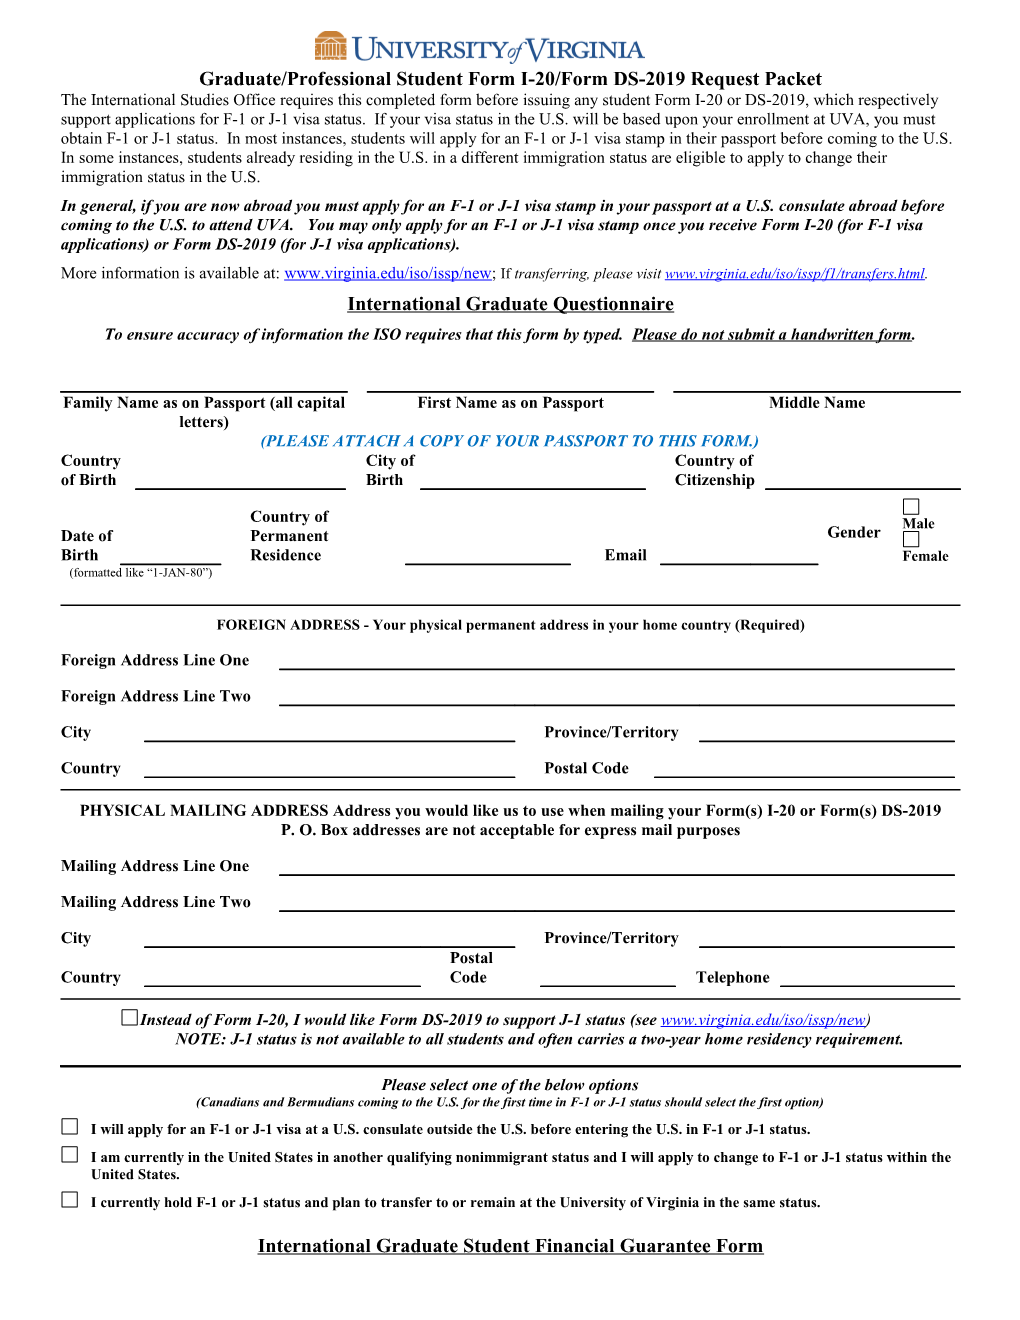 2004 Application for Form I-20: Certificate of Eligibility for Nonimmigrant (F-1) Student Status